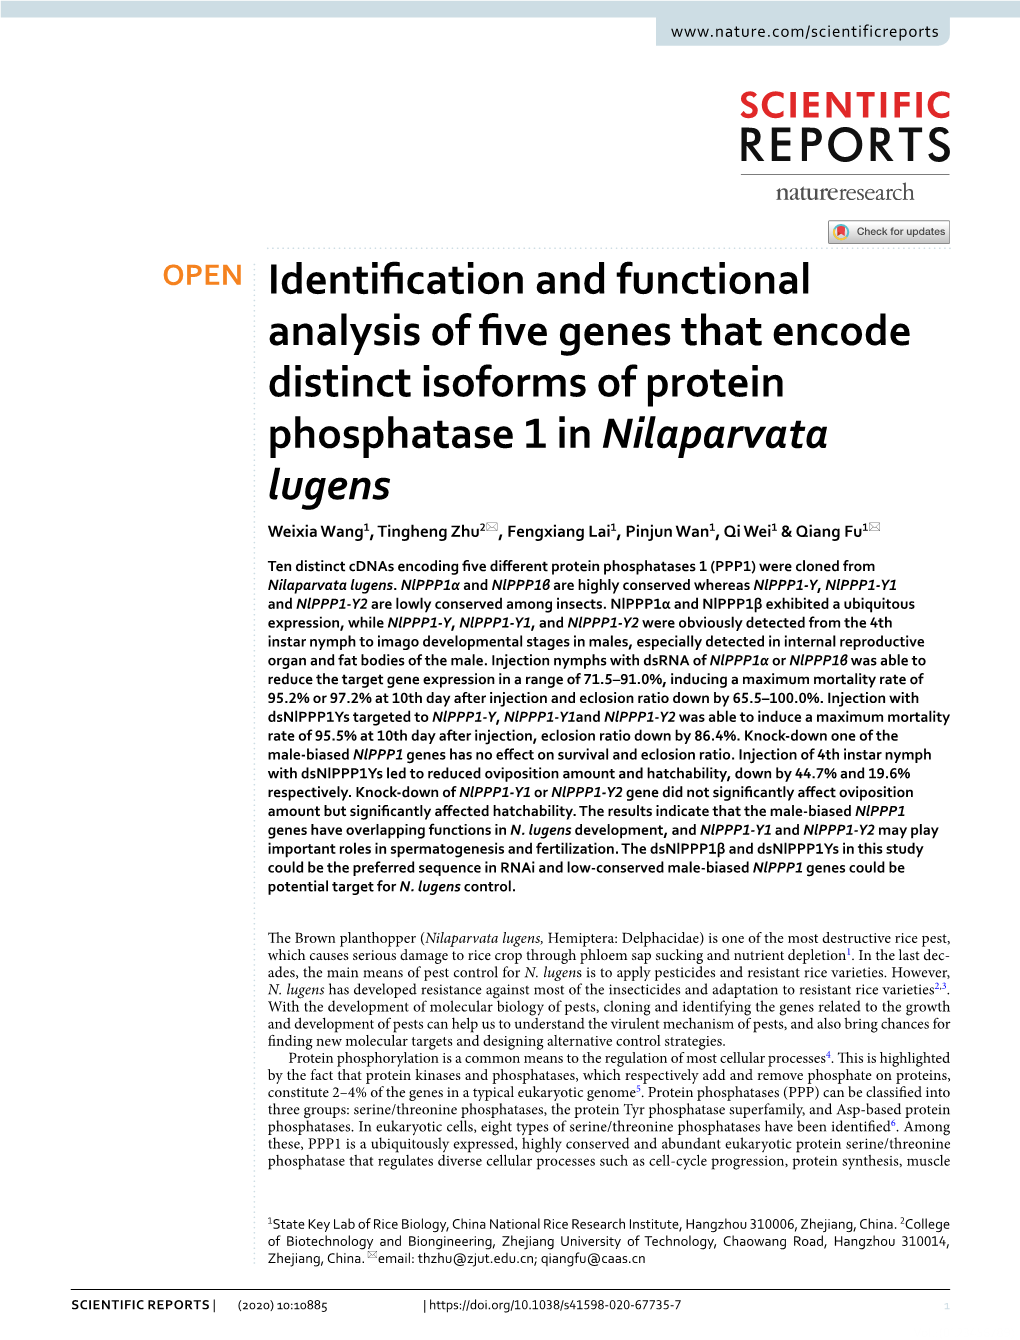 Identification and Functional Analysis of Five Genes That Encode Distinct Isoforms of Protein Phosphatase 1 in Nilaparvata Lugens